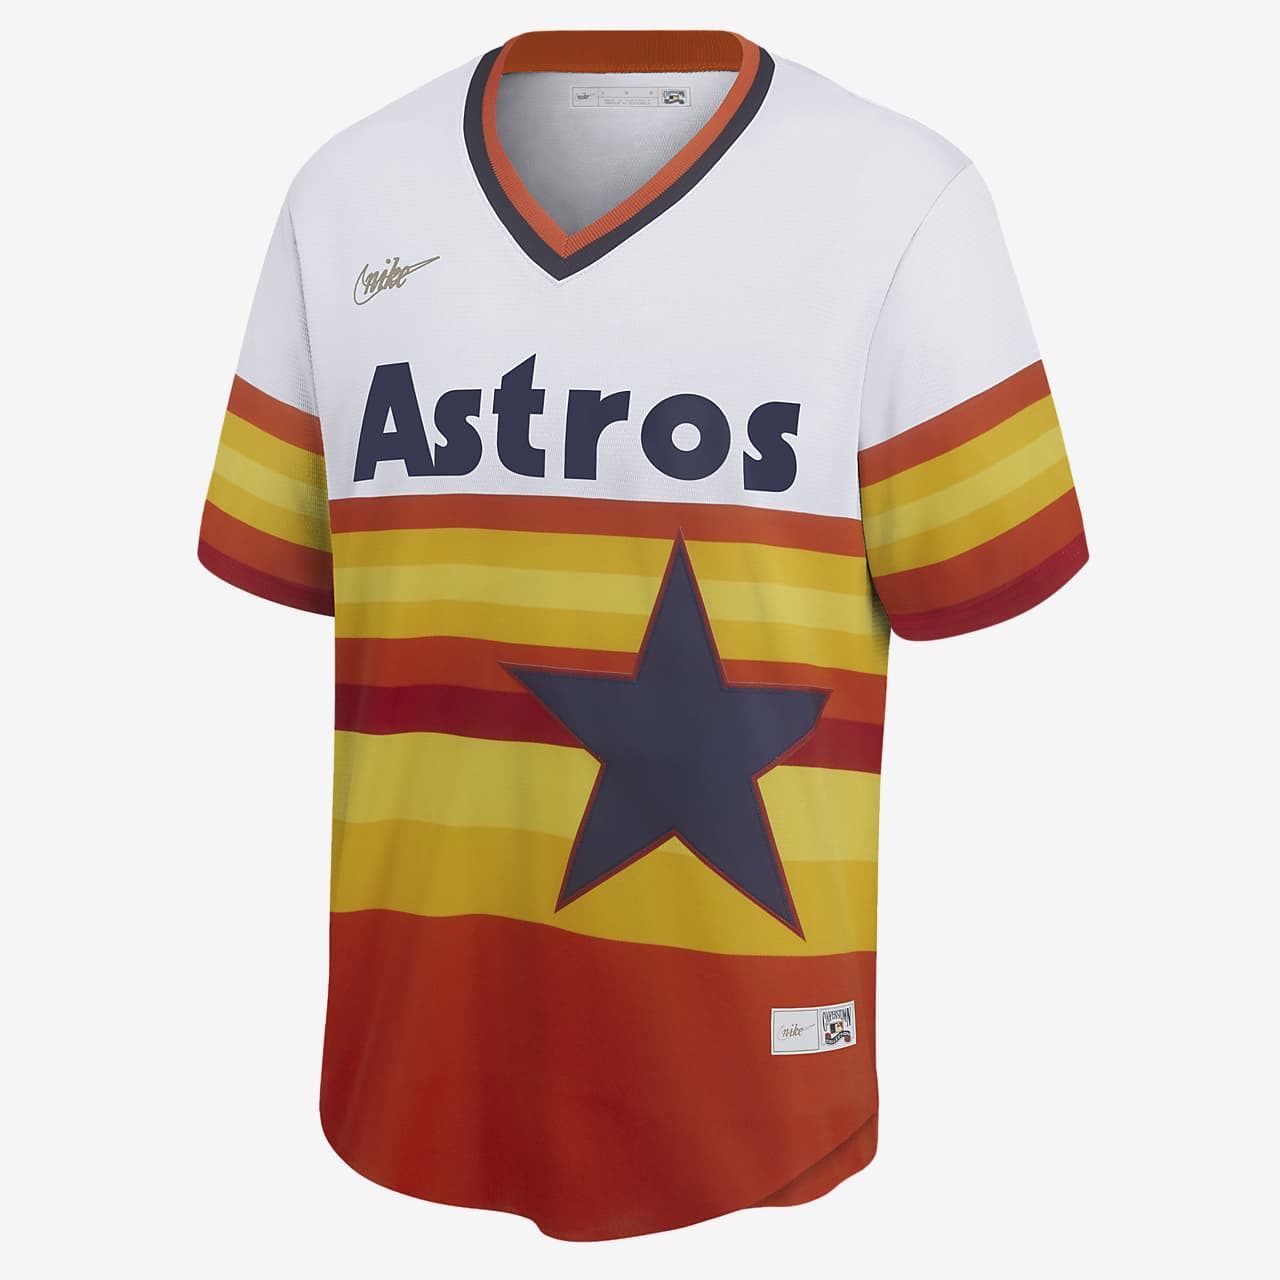 real astros jersey